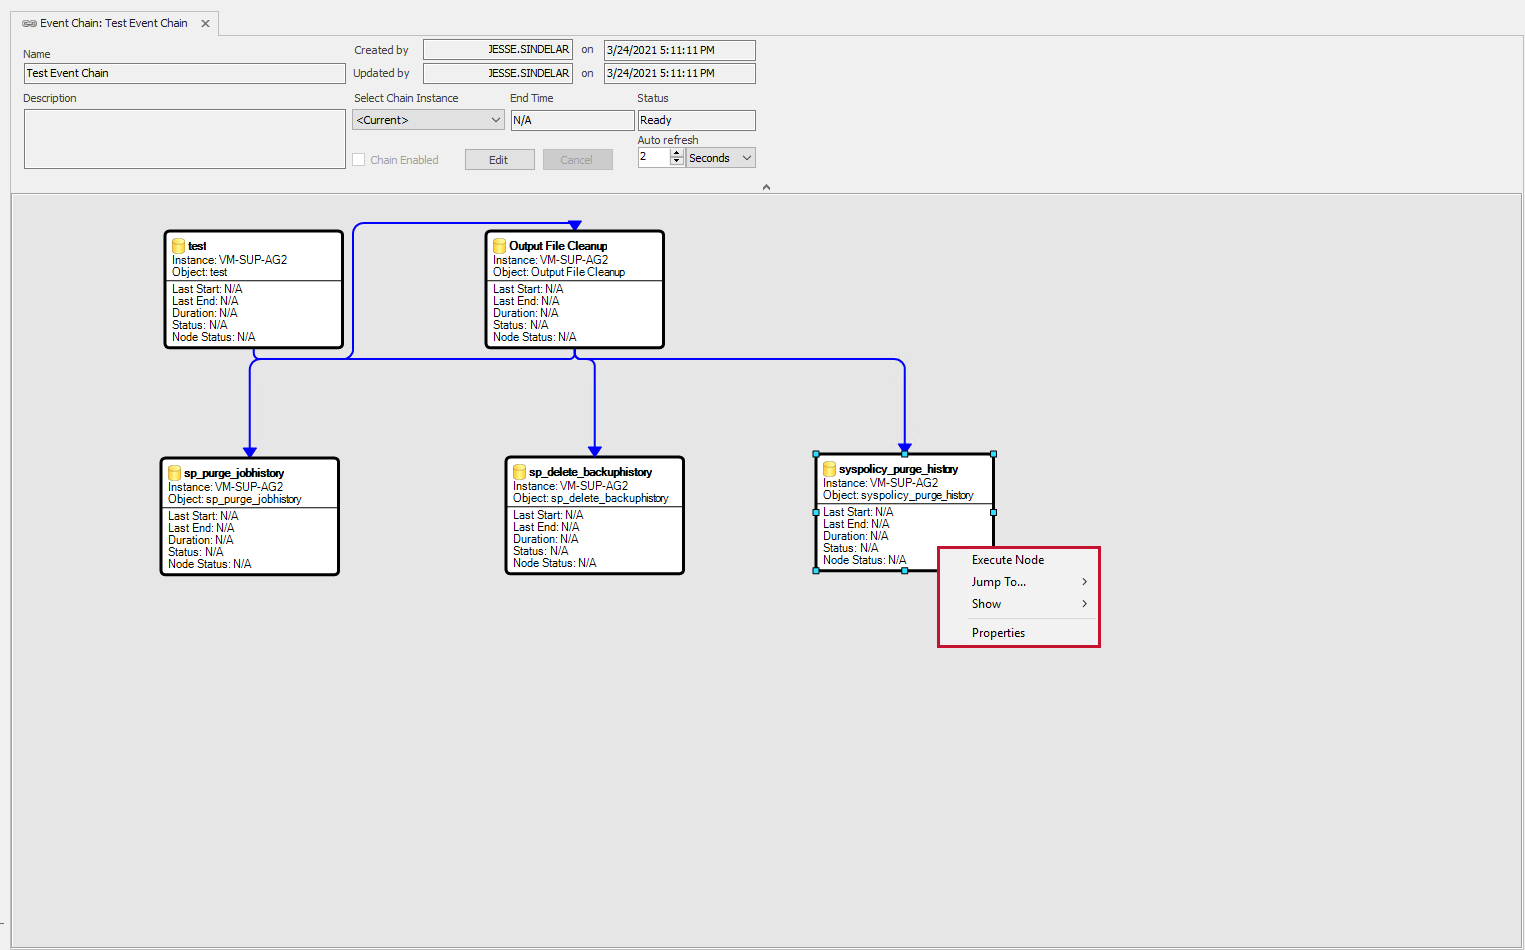 Event Chain tab displaying 5 events with connected workflows, and the node context menu options highlighted.